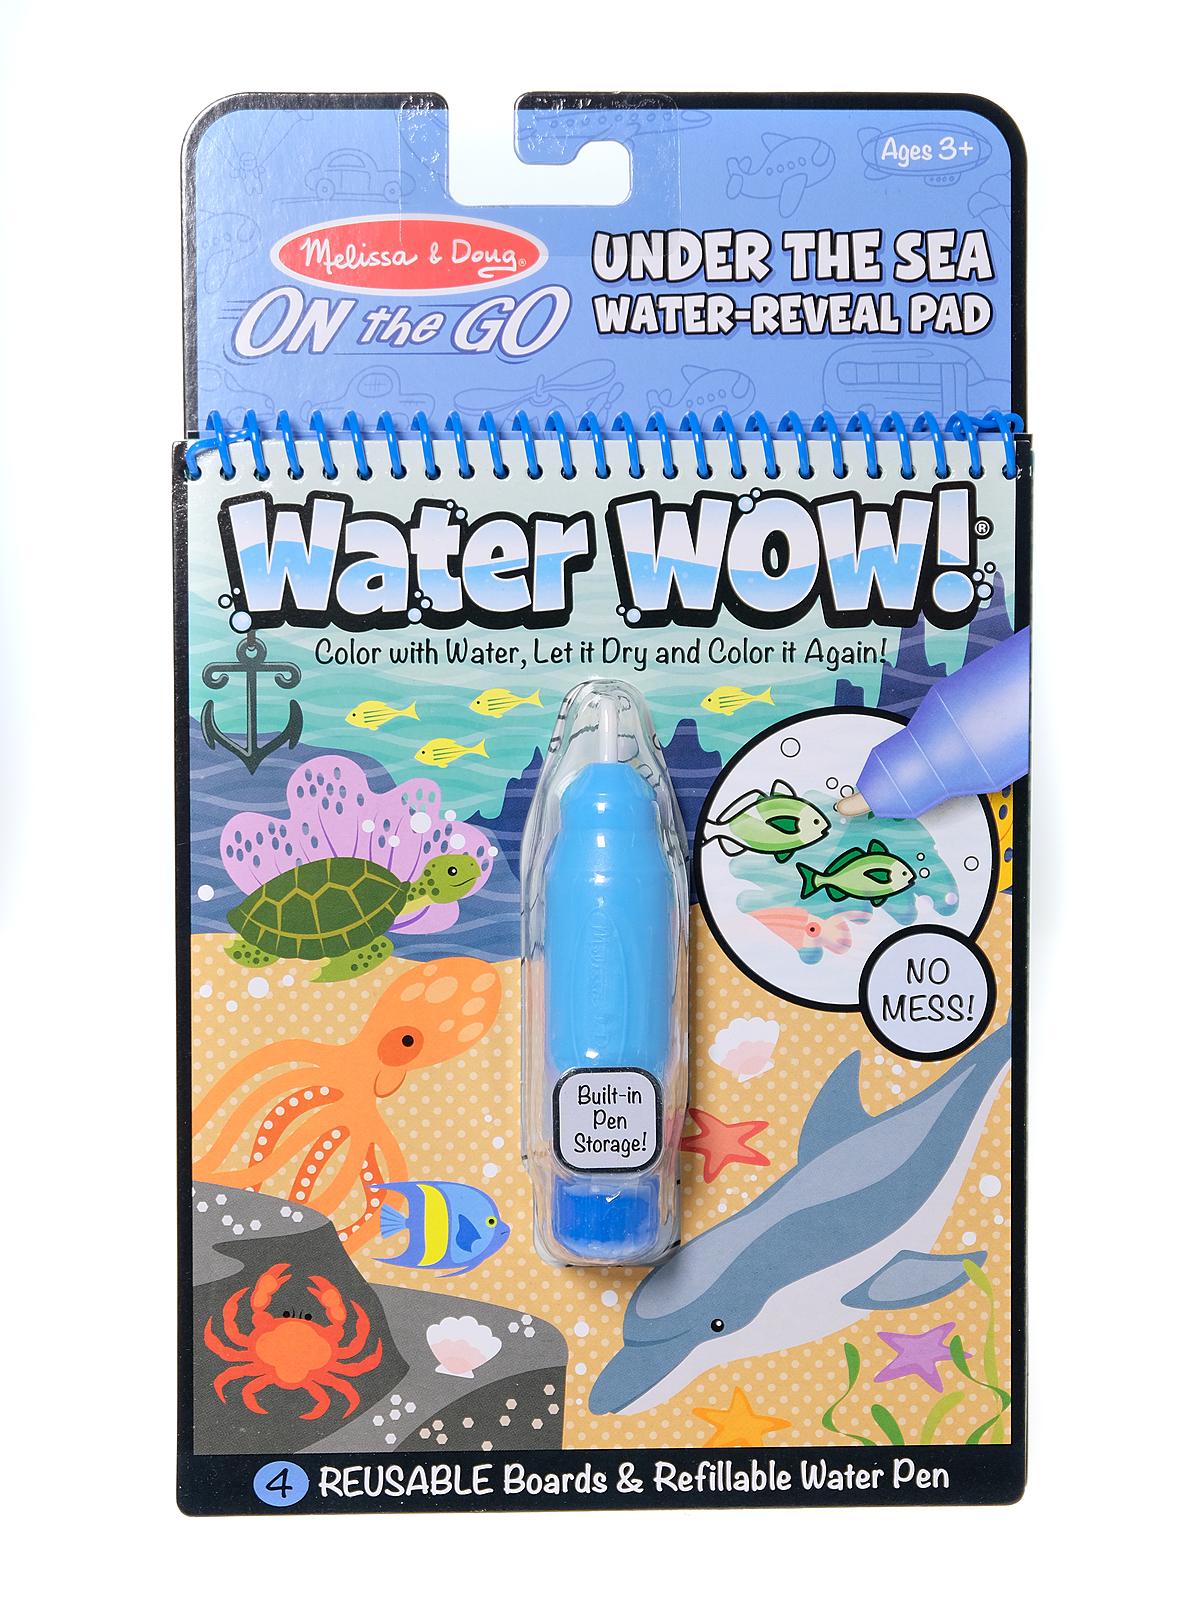 On The Go Water Wow Under The Sea